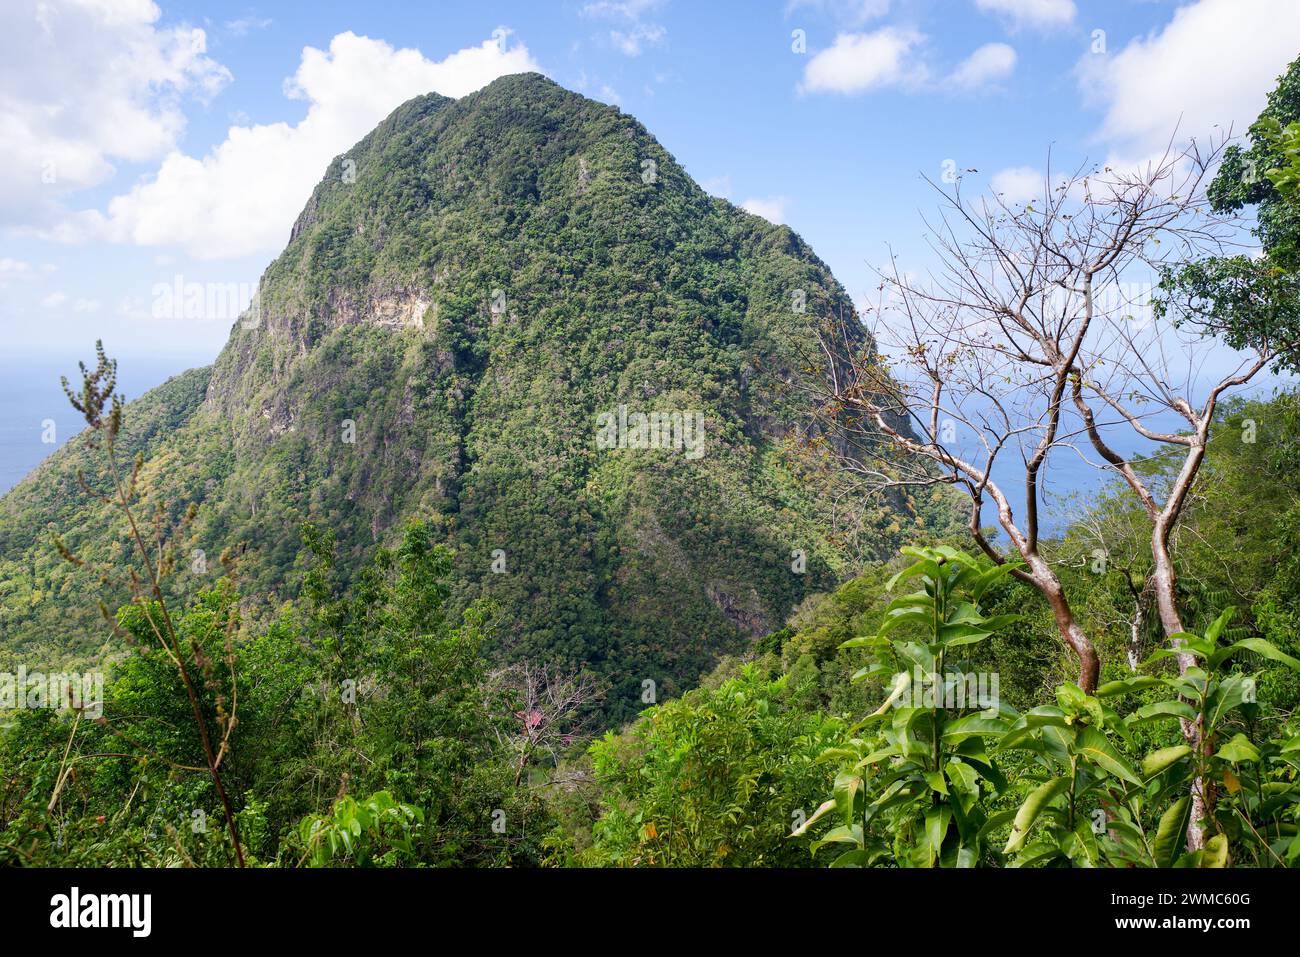 The iconic Gros Piton seen from Tet Paul nature trail - Saint Lucia, West Indies Stock Photo